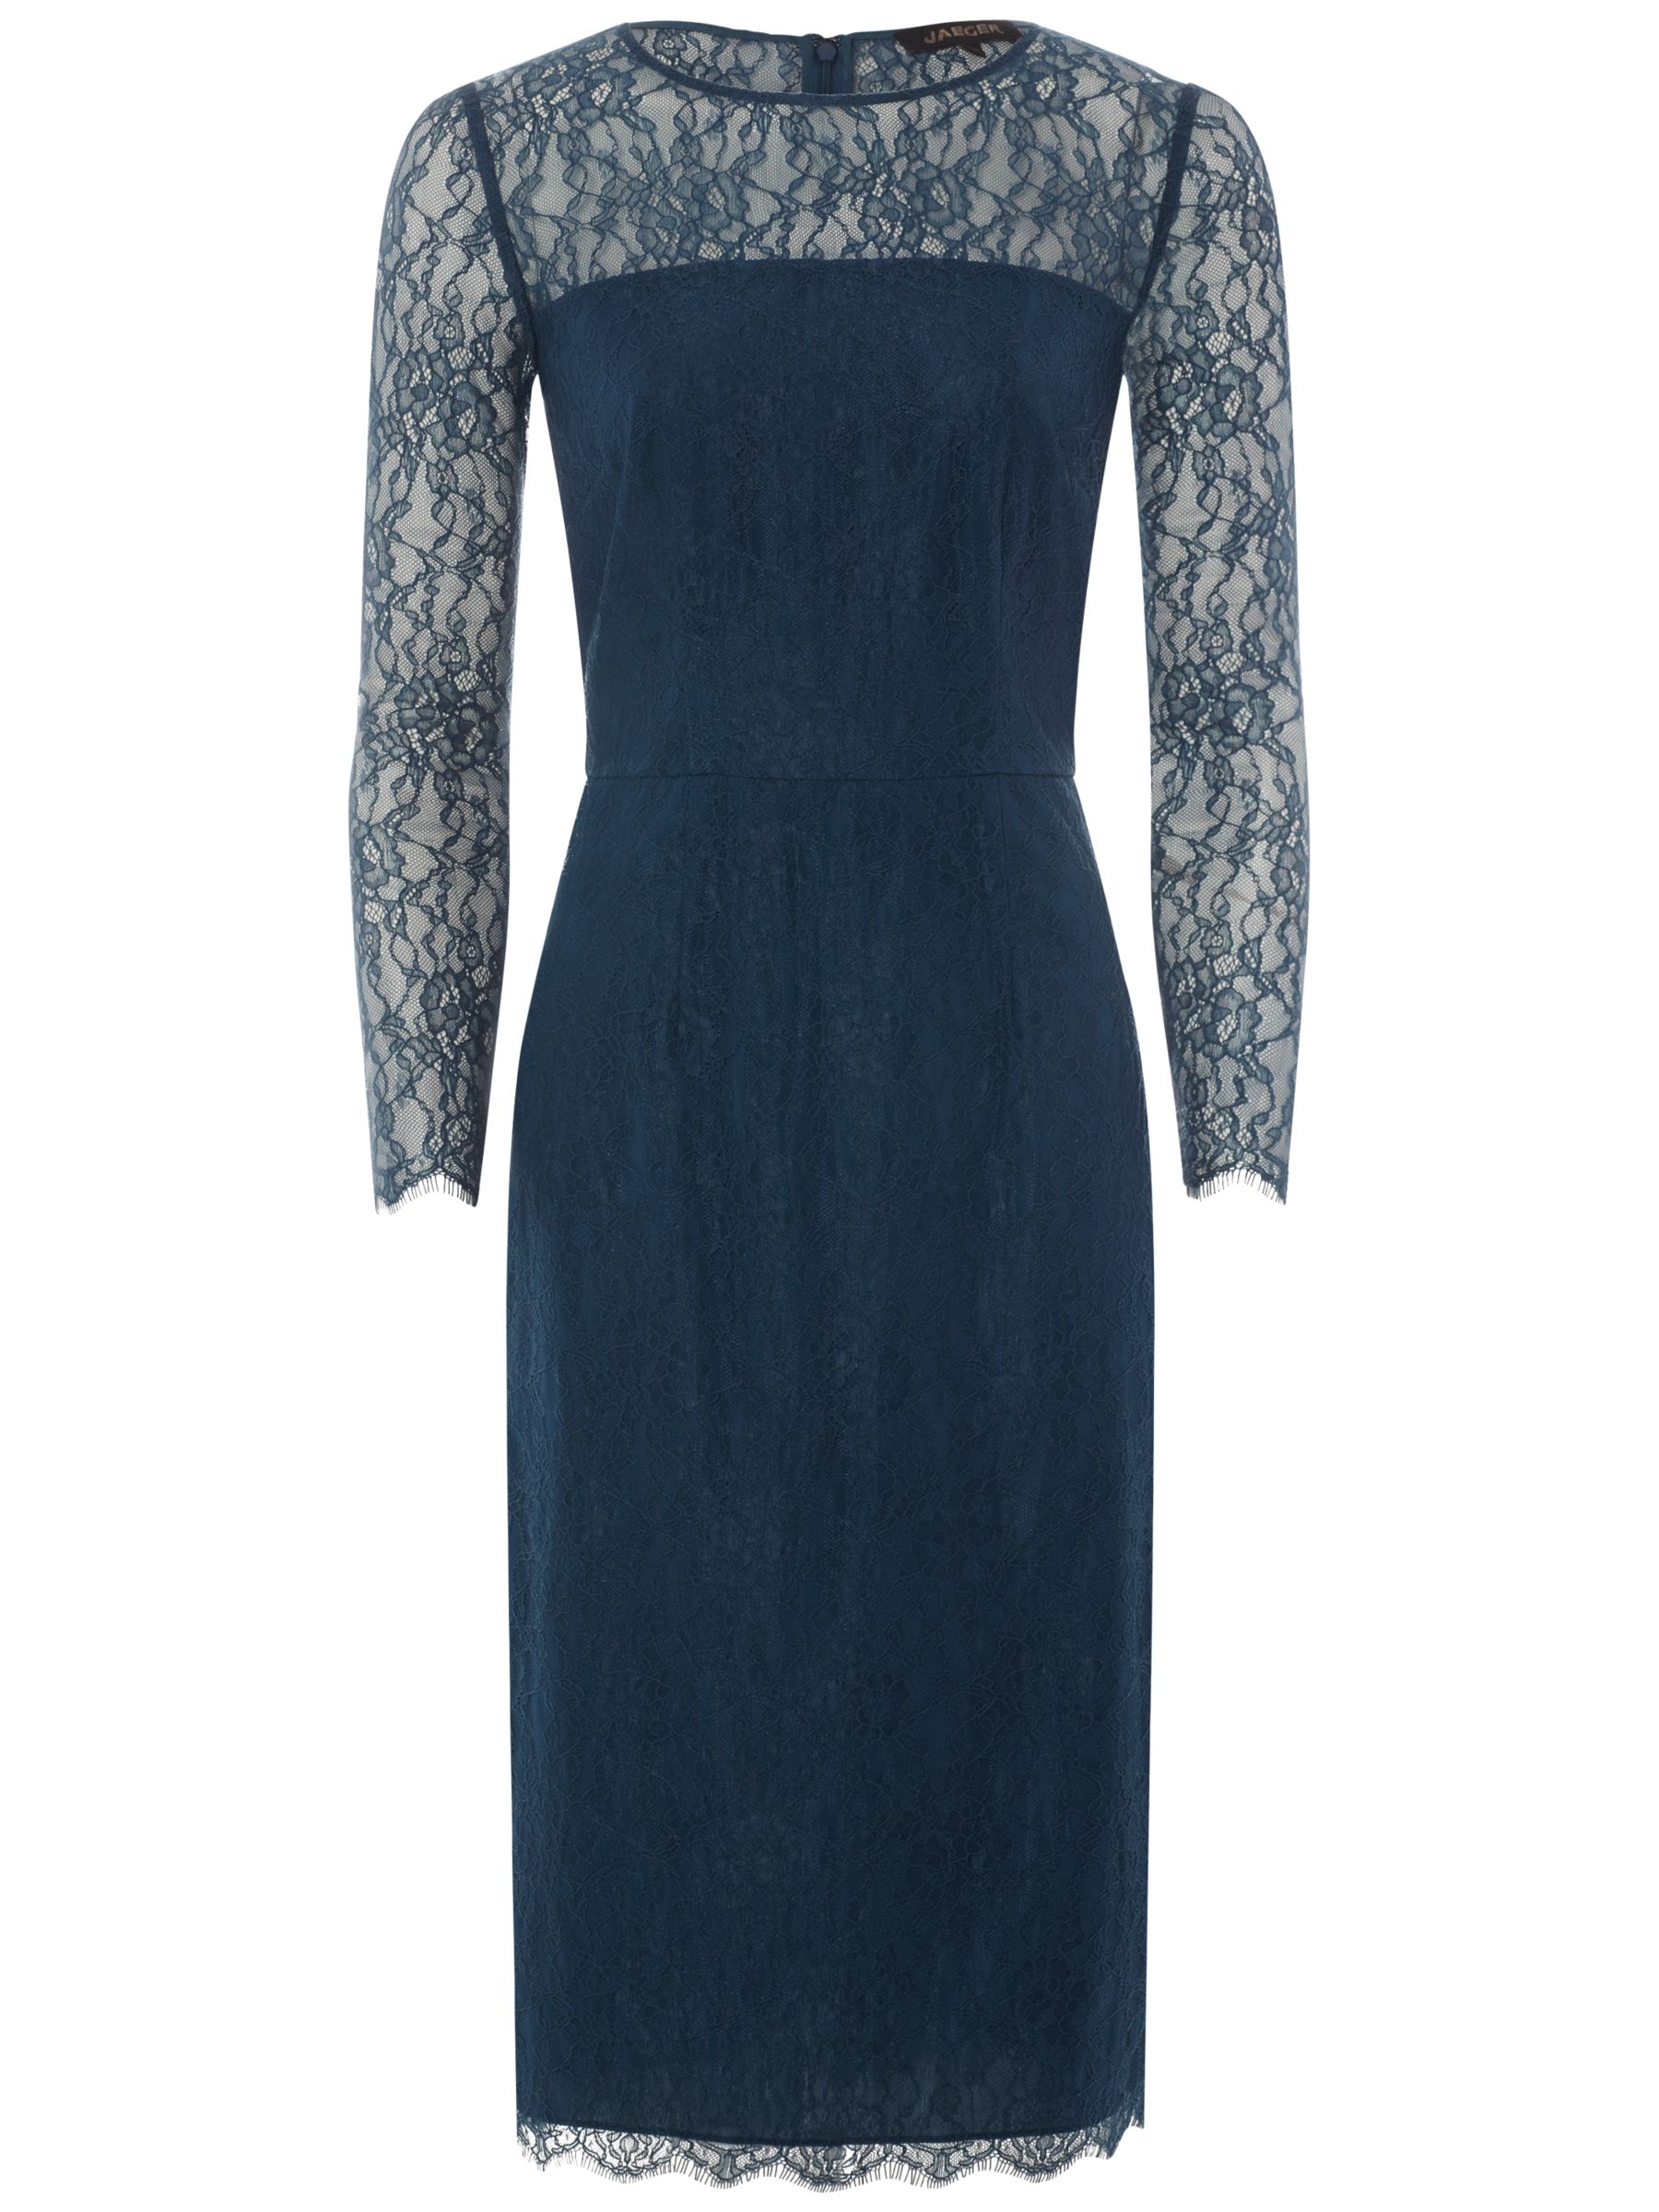 Jaeger All Over Lace Dress, Storm Blue